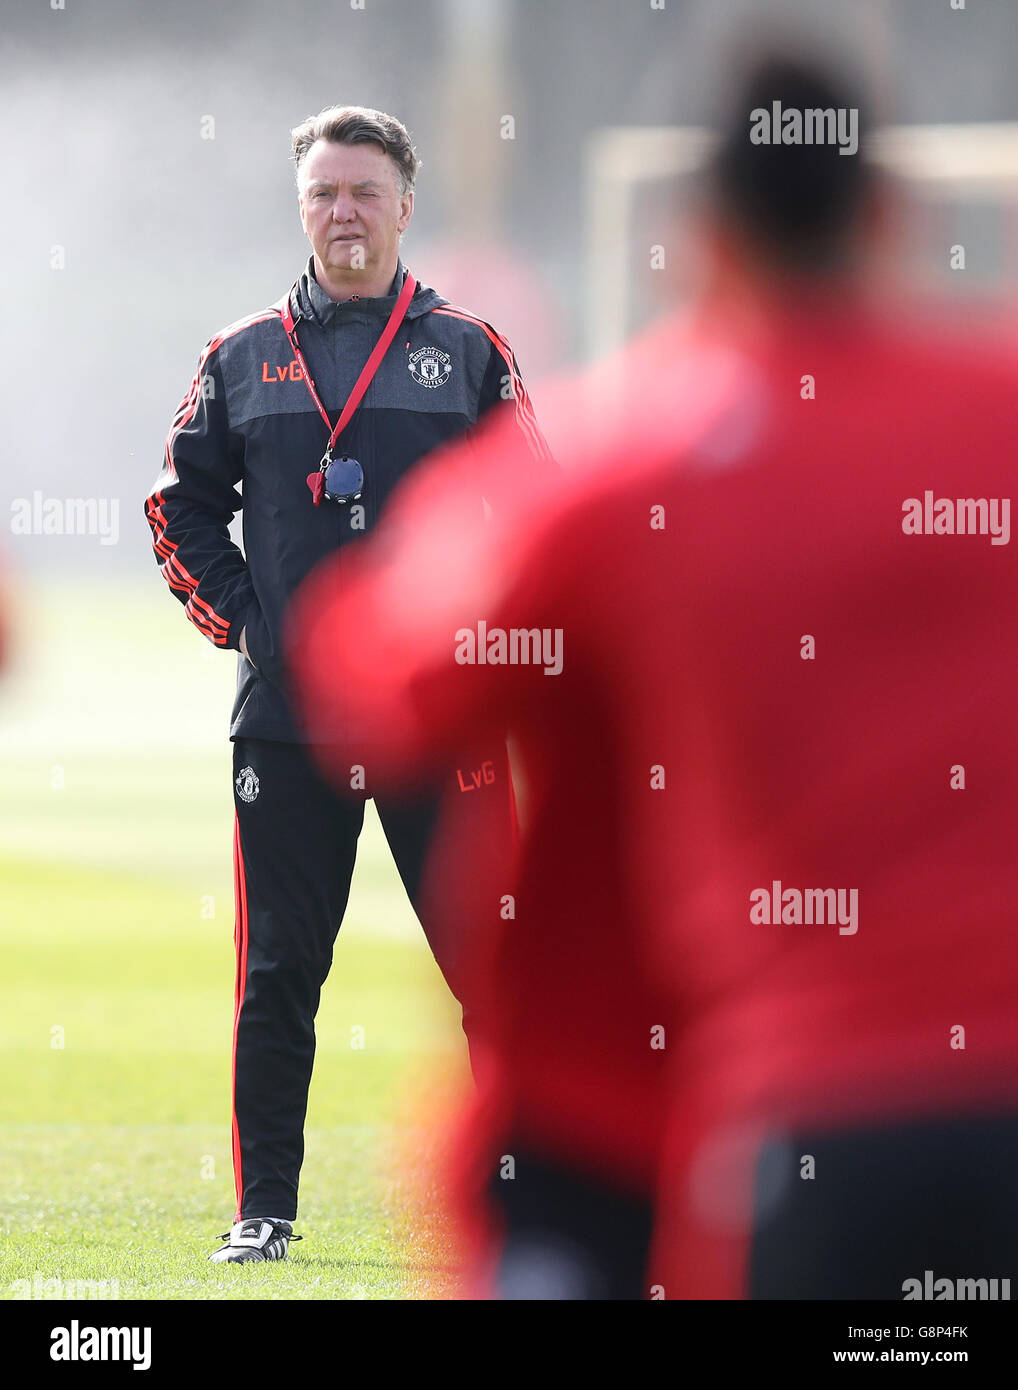 Manchester United manager Louis van Gaal during a training session at the AON Training Complex, Carrington. PRESS ASSOCIATION Photo. Picture date: Wednesday March 16, 2016. See PA story SOCCER Man Utd. Photo credit should read: Martin Rickett/PA Wire. Stock Photo